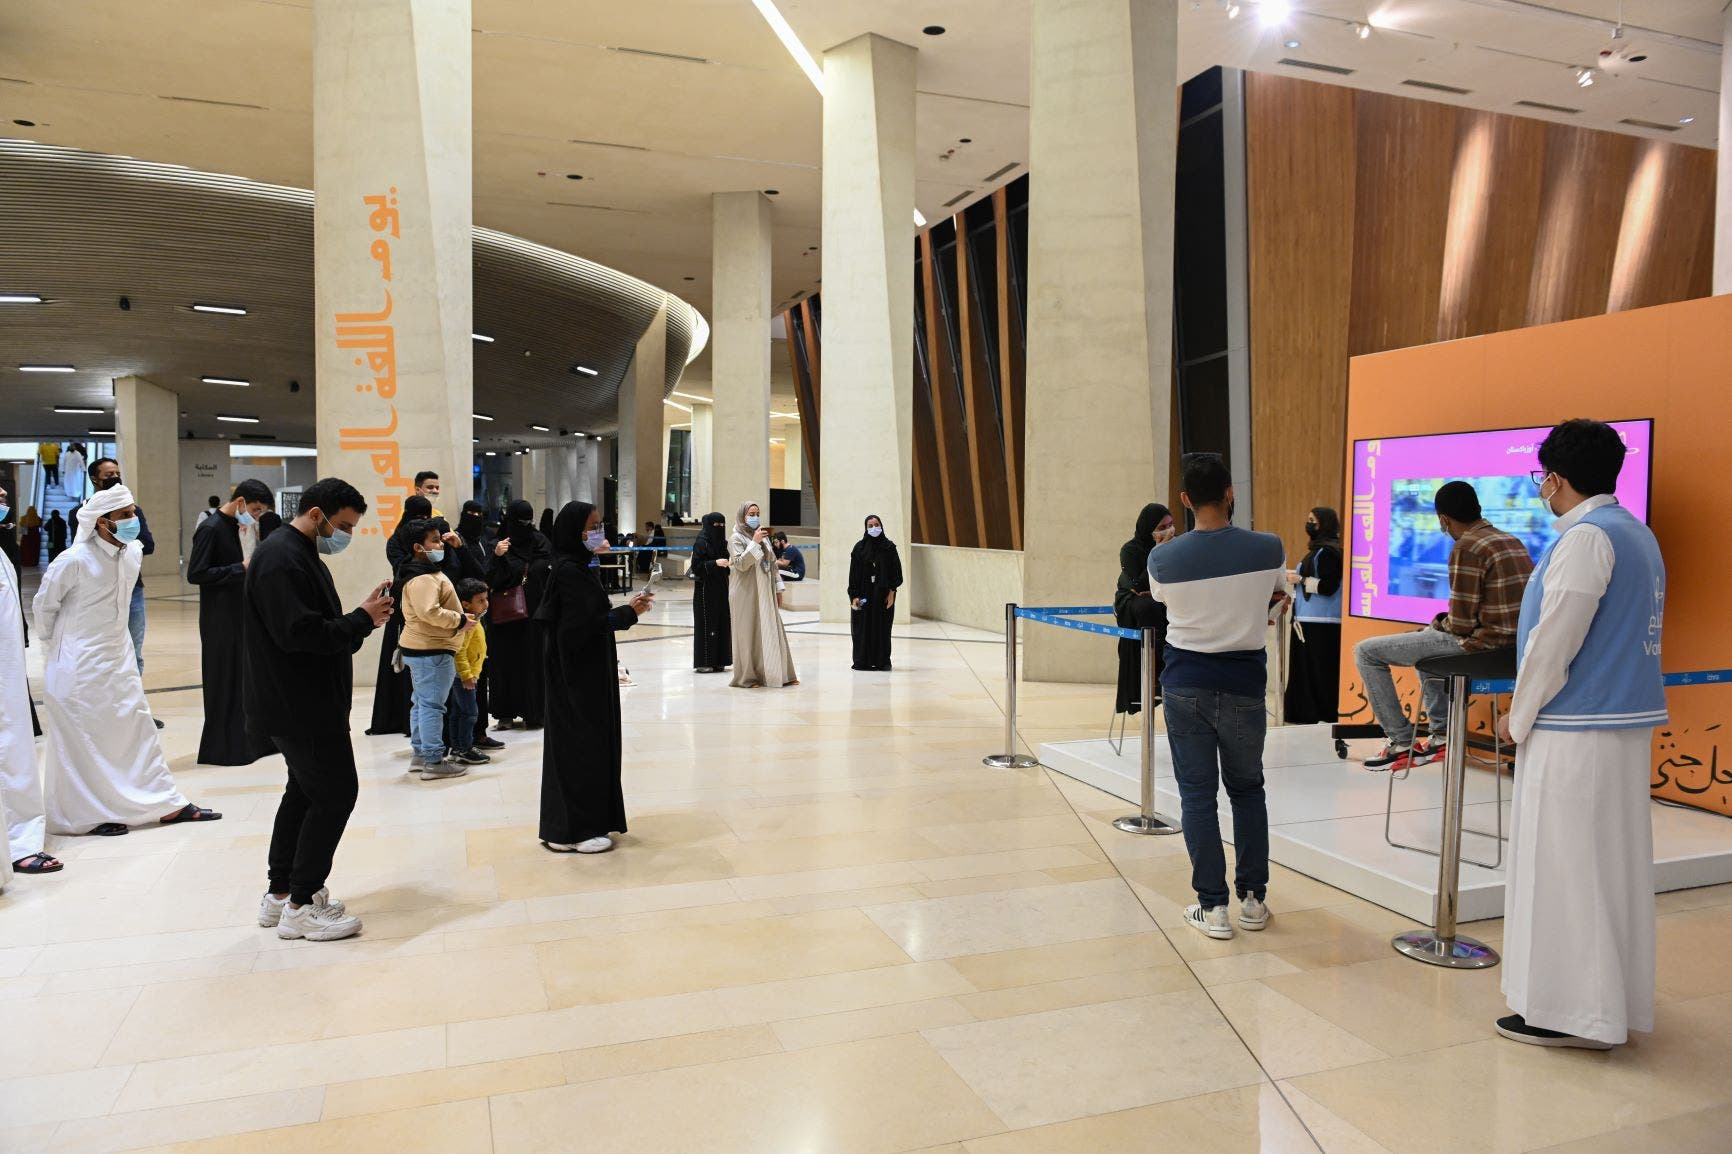 Within the interaction of visitors with the program